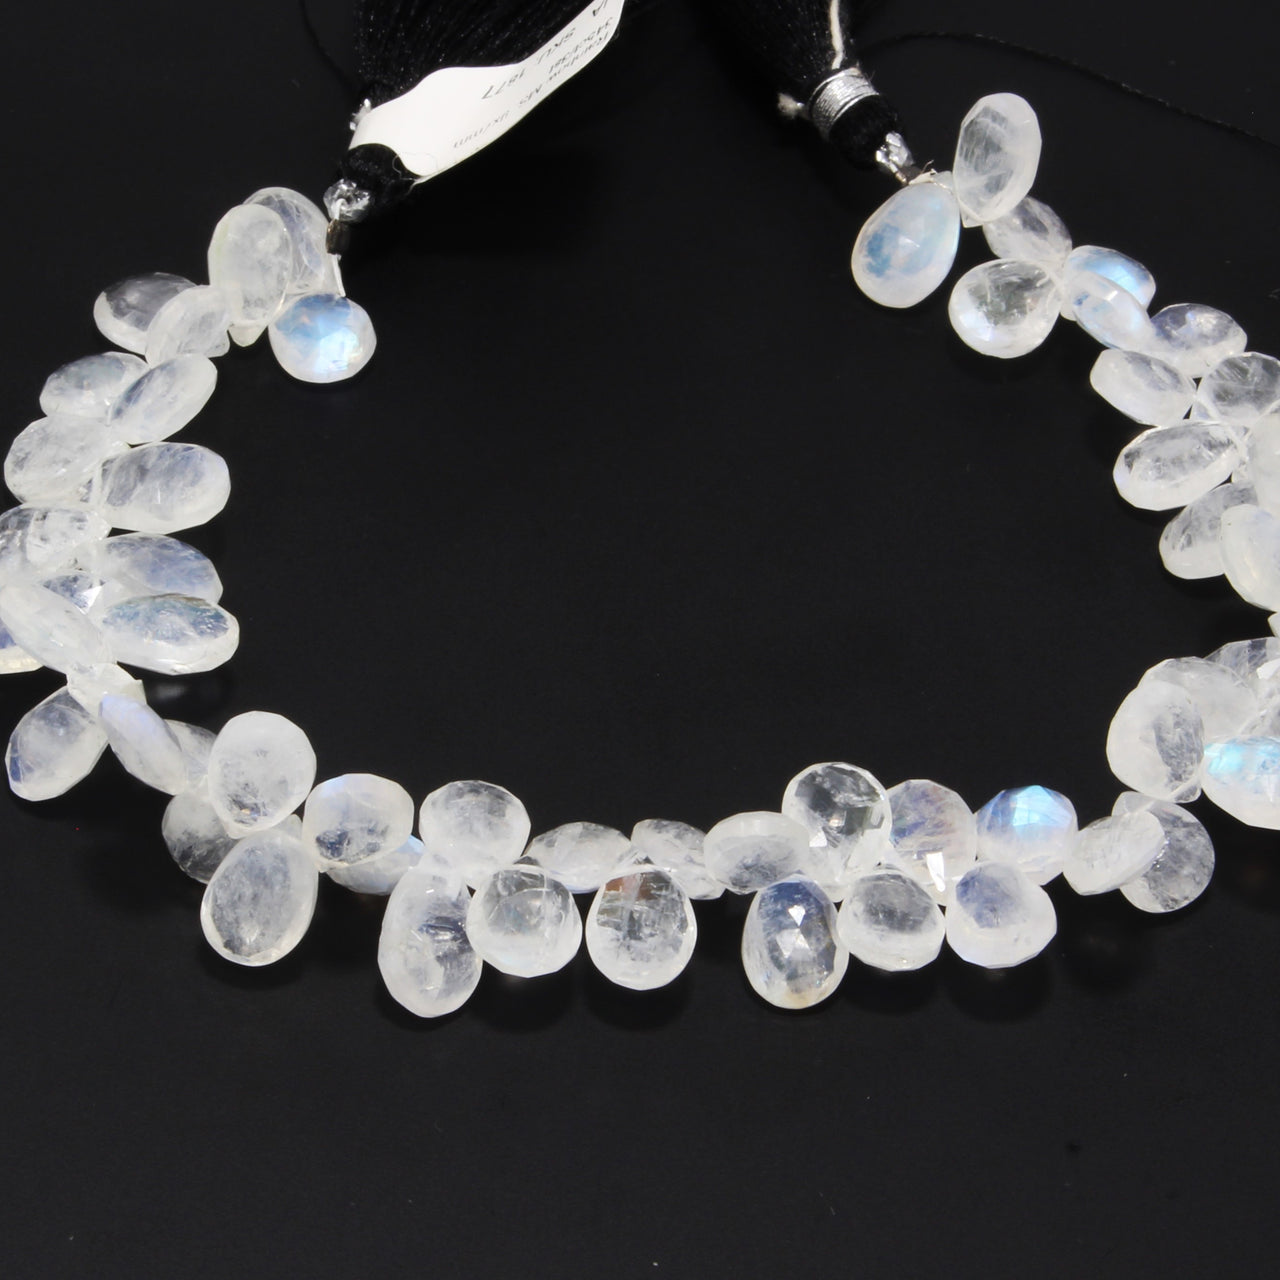 Blue Rainbow Moonstone 9x7mm Faceted Pear Shaped Briolettes 8" Bead Strand